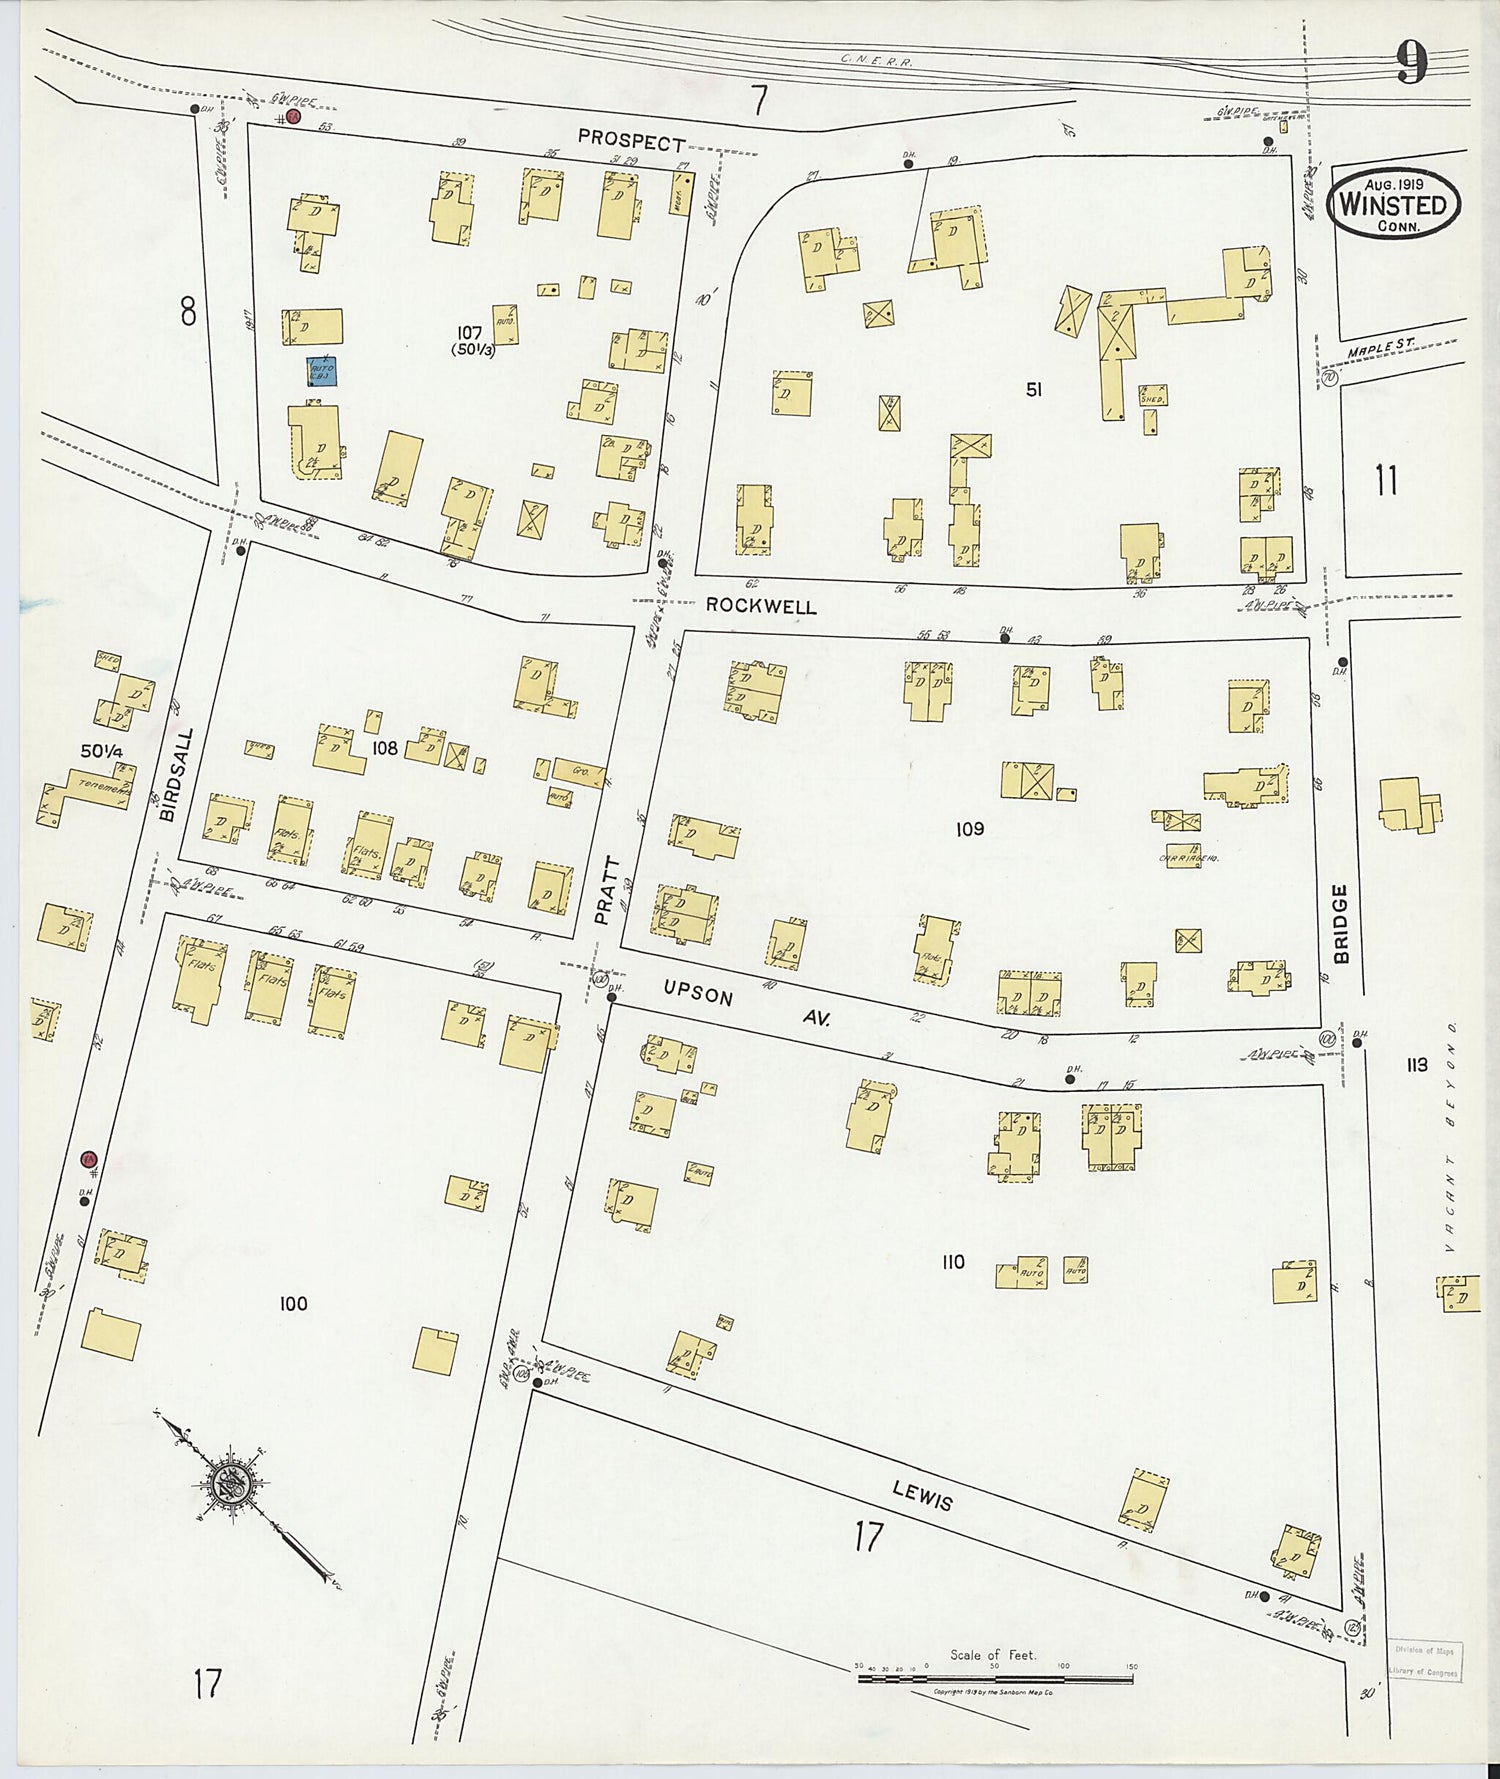 This old map of Winsted, Litchfield County, Connecticut was created by Sanborn Map Company in 1919